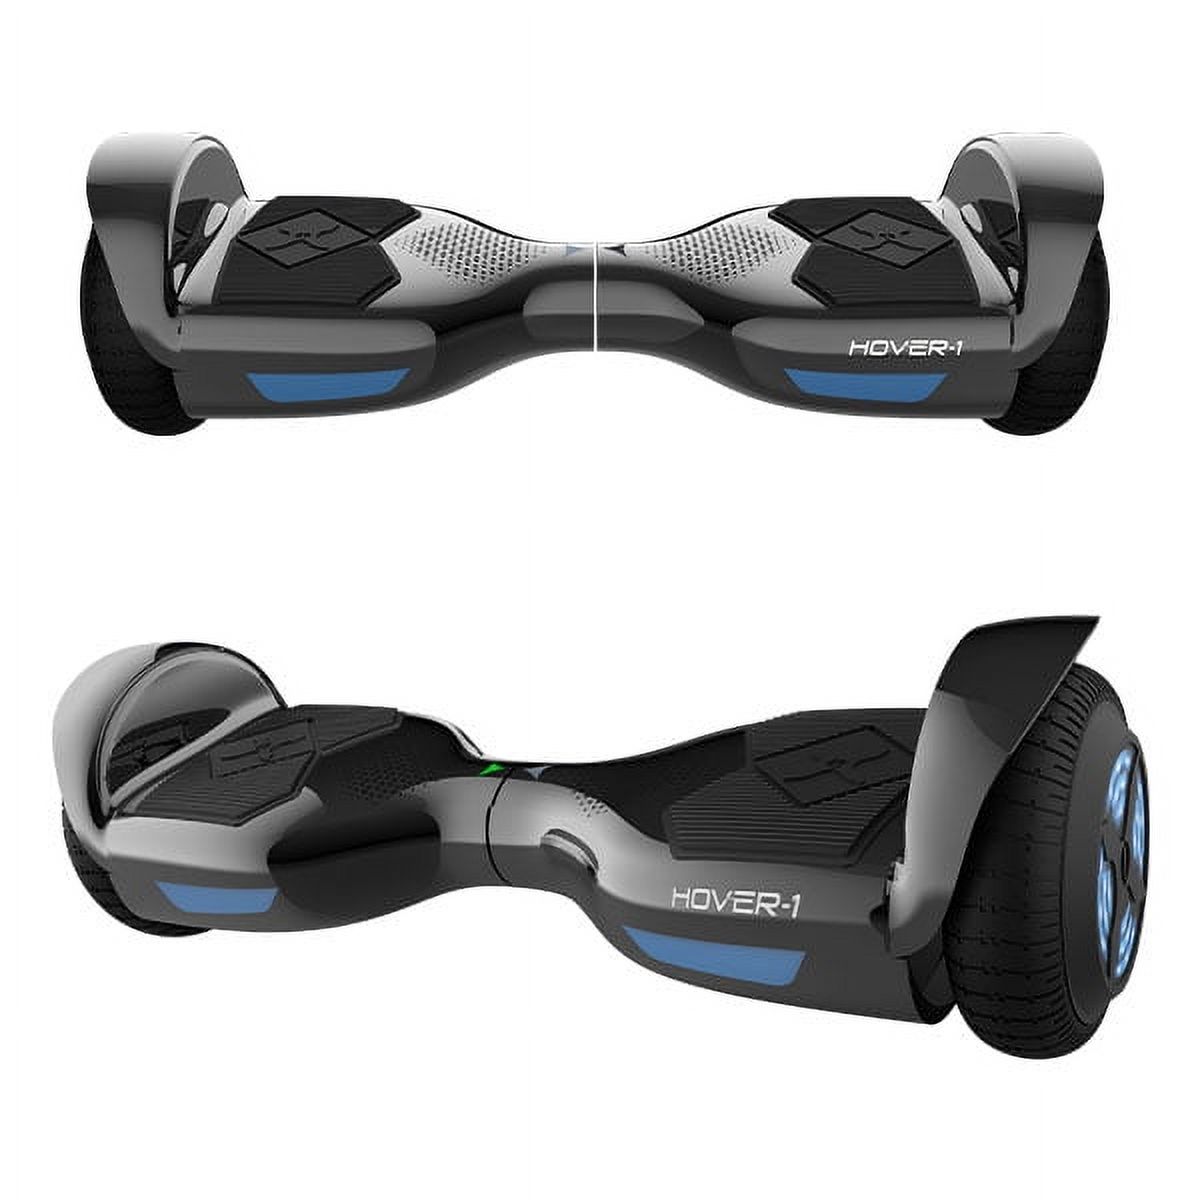 Hover-1 Helix UL Certified Electric Hoverboard, 6.5in LED Wheels, Bluetooth Speaker, Gunmetal Gray - image 2 of 8